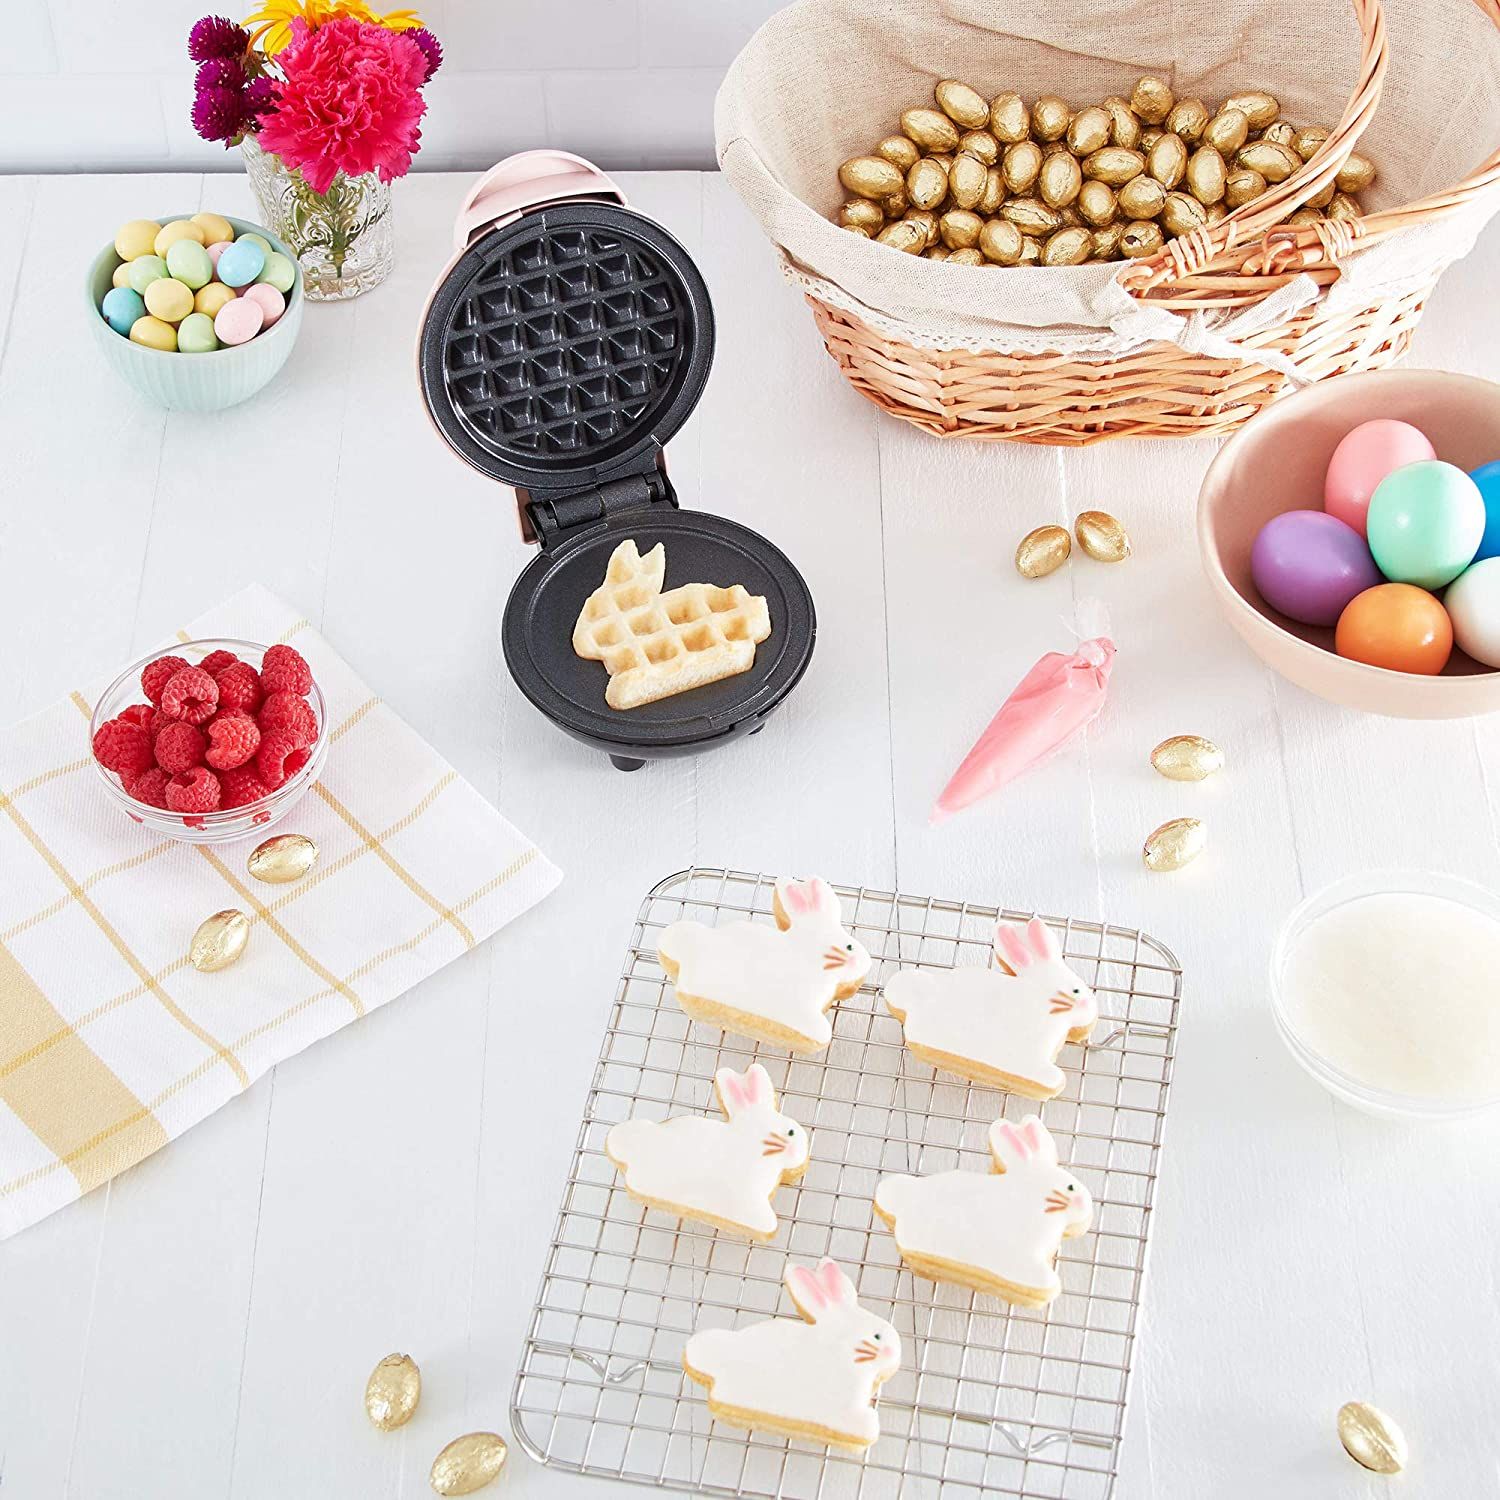 This Bunny Waffle Maker from Dash Is Perfect for Easter